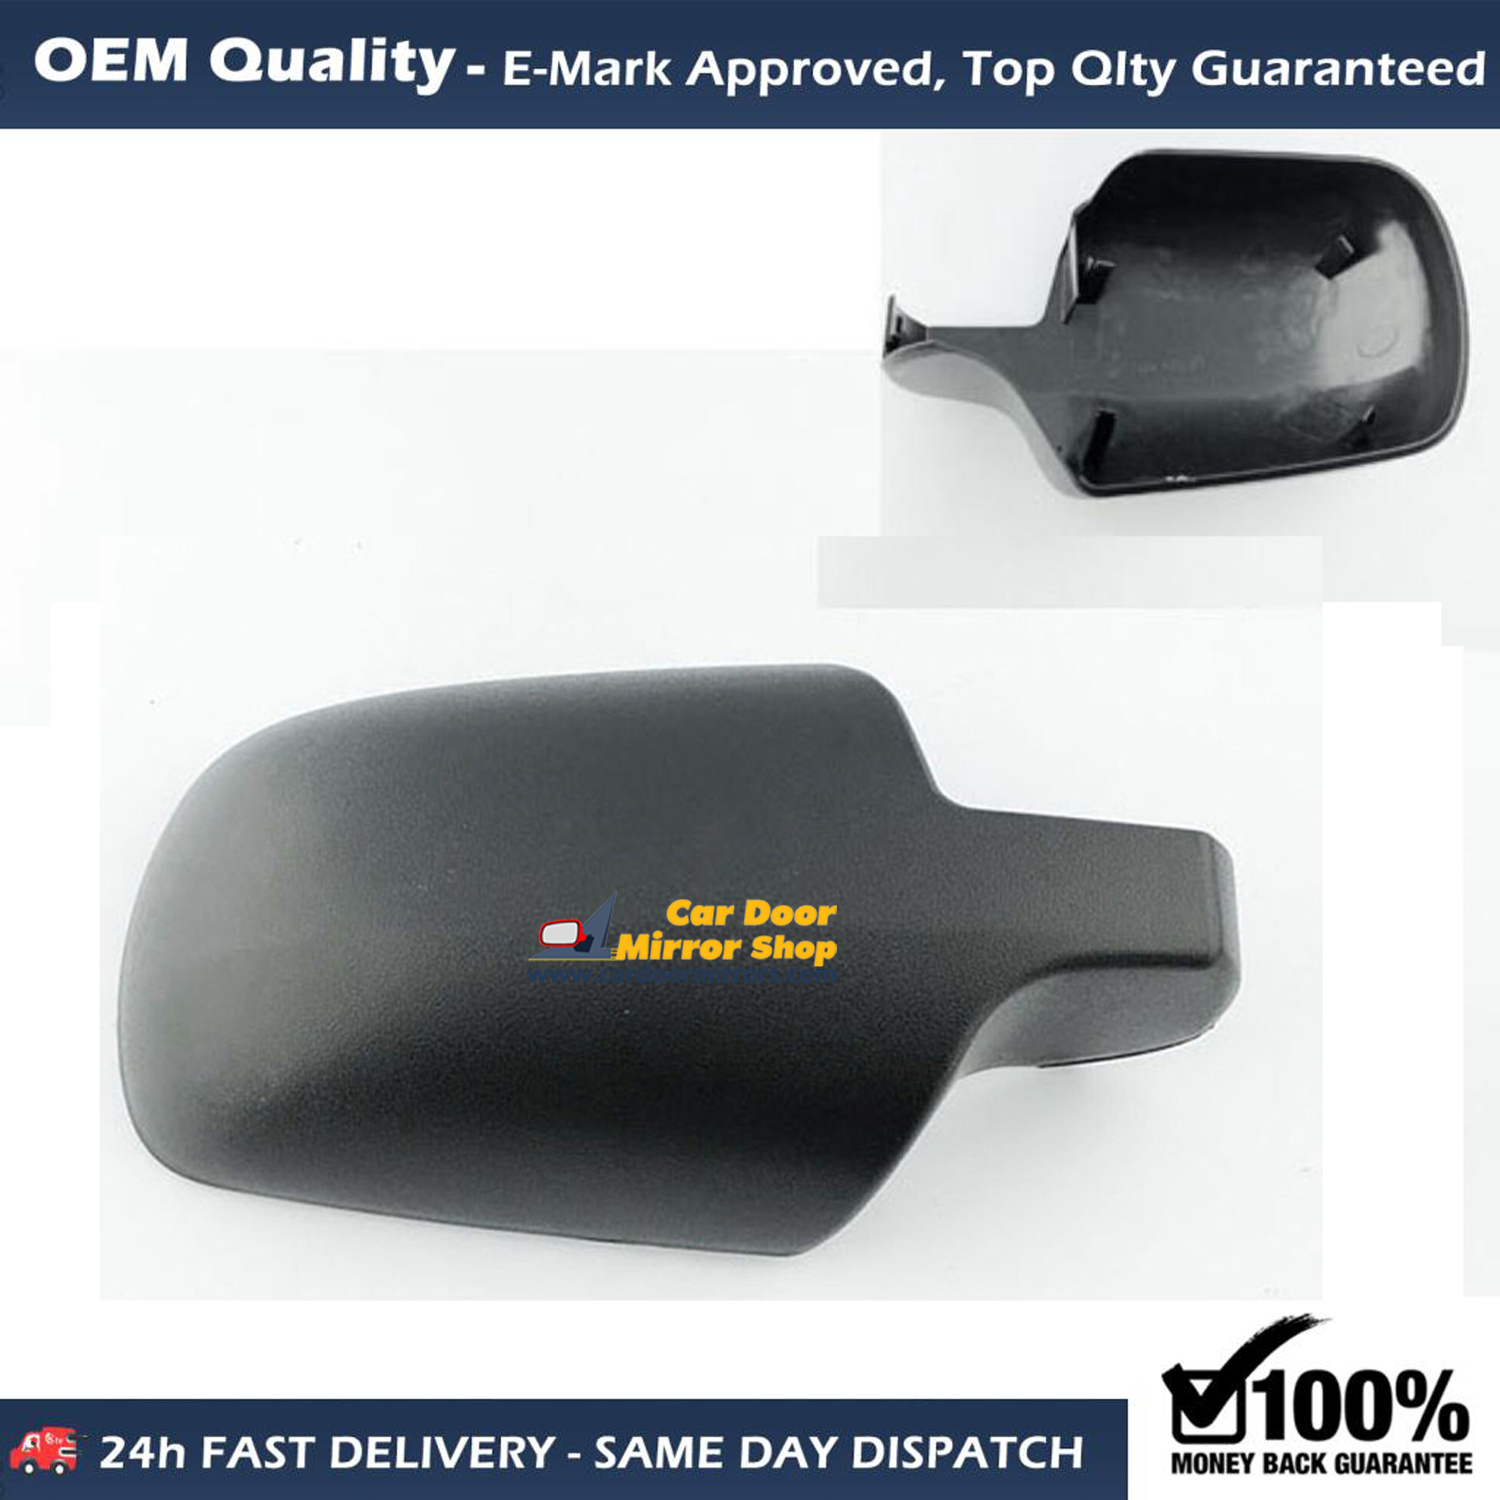 Ford Fusion Wing Mirror Cover LEFT HAND ( UK Passenger Side ) 2002 to 2006 – Wing Mirror Cover